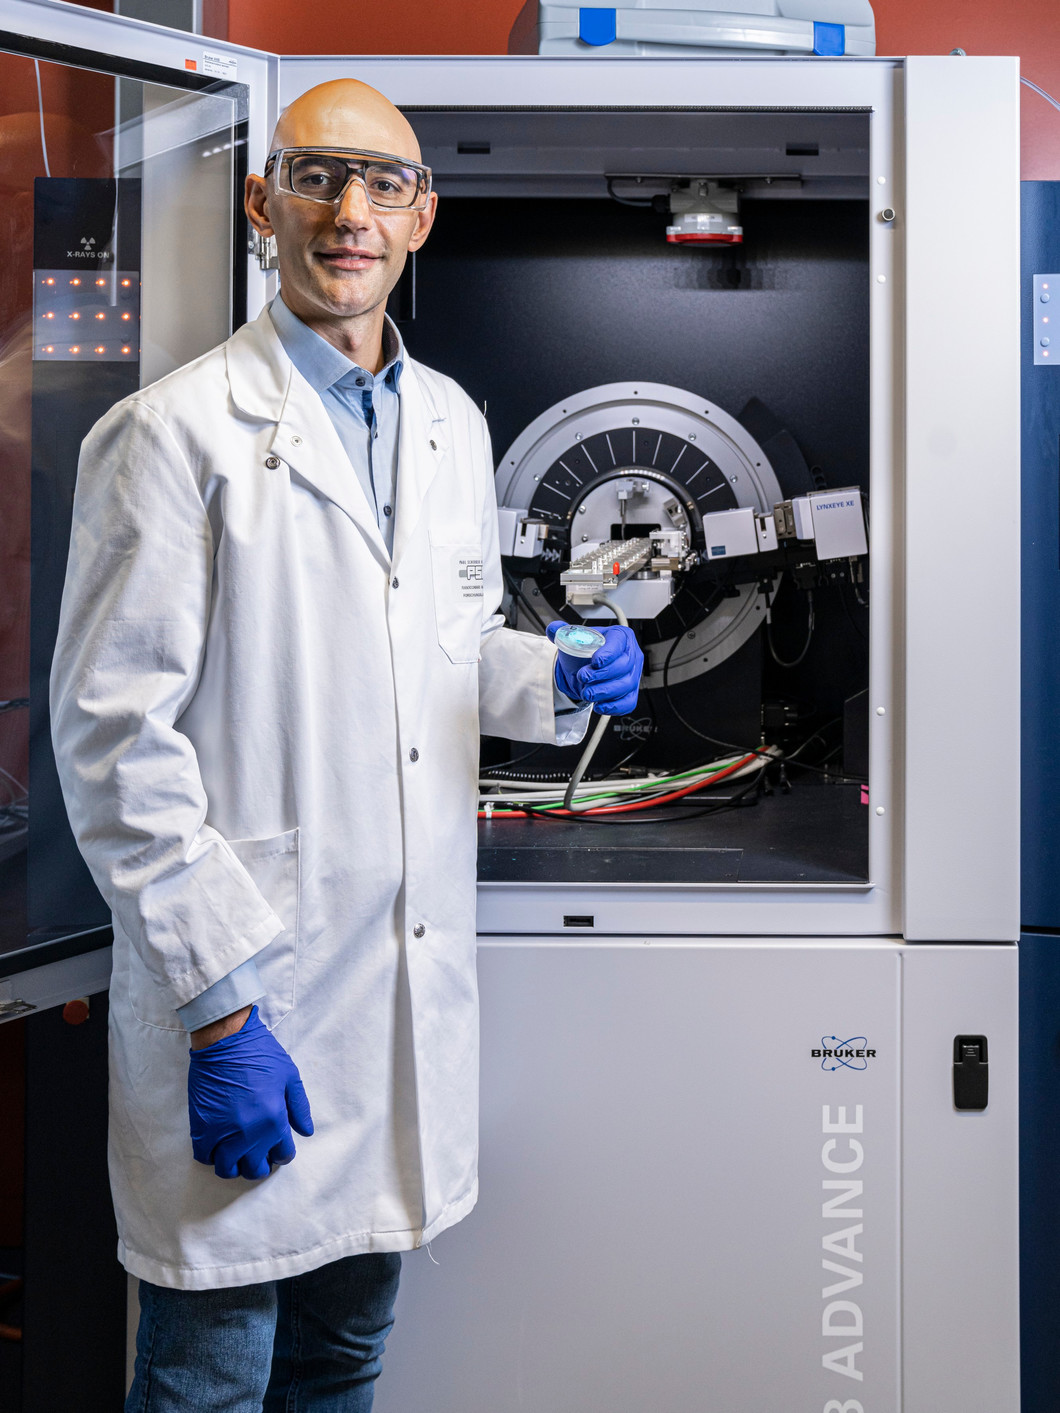 Marco Ranocchiari standing by his research group’s X-ray diffractometer. His team uses the equipment for regular investigations into metal organic frameworks (MOFs) in powder form. These could be used in pharmaceutical production processes.